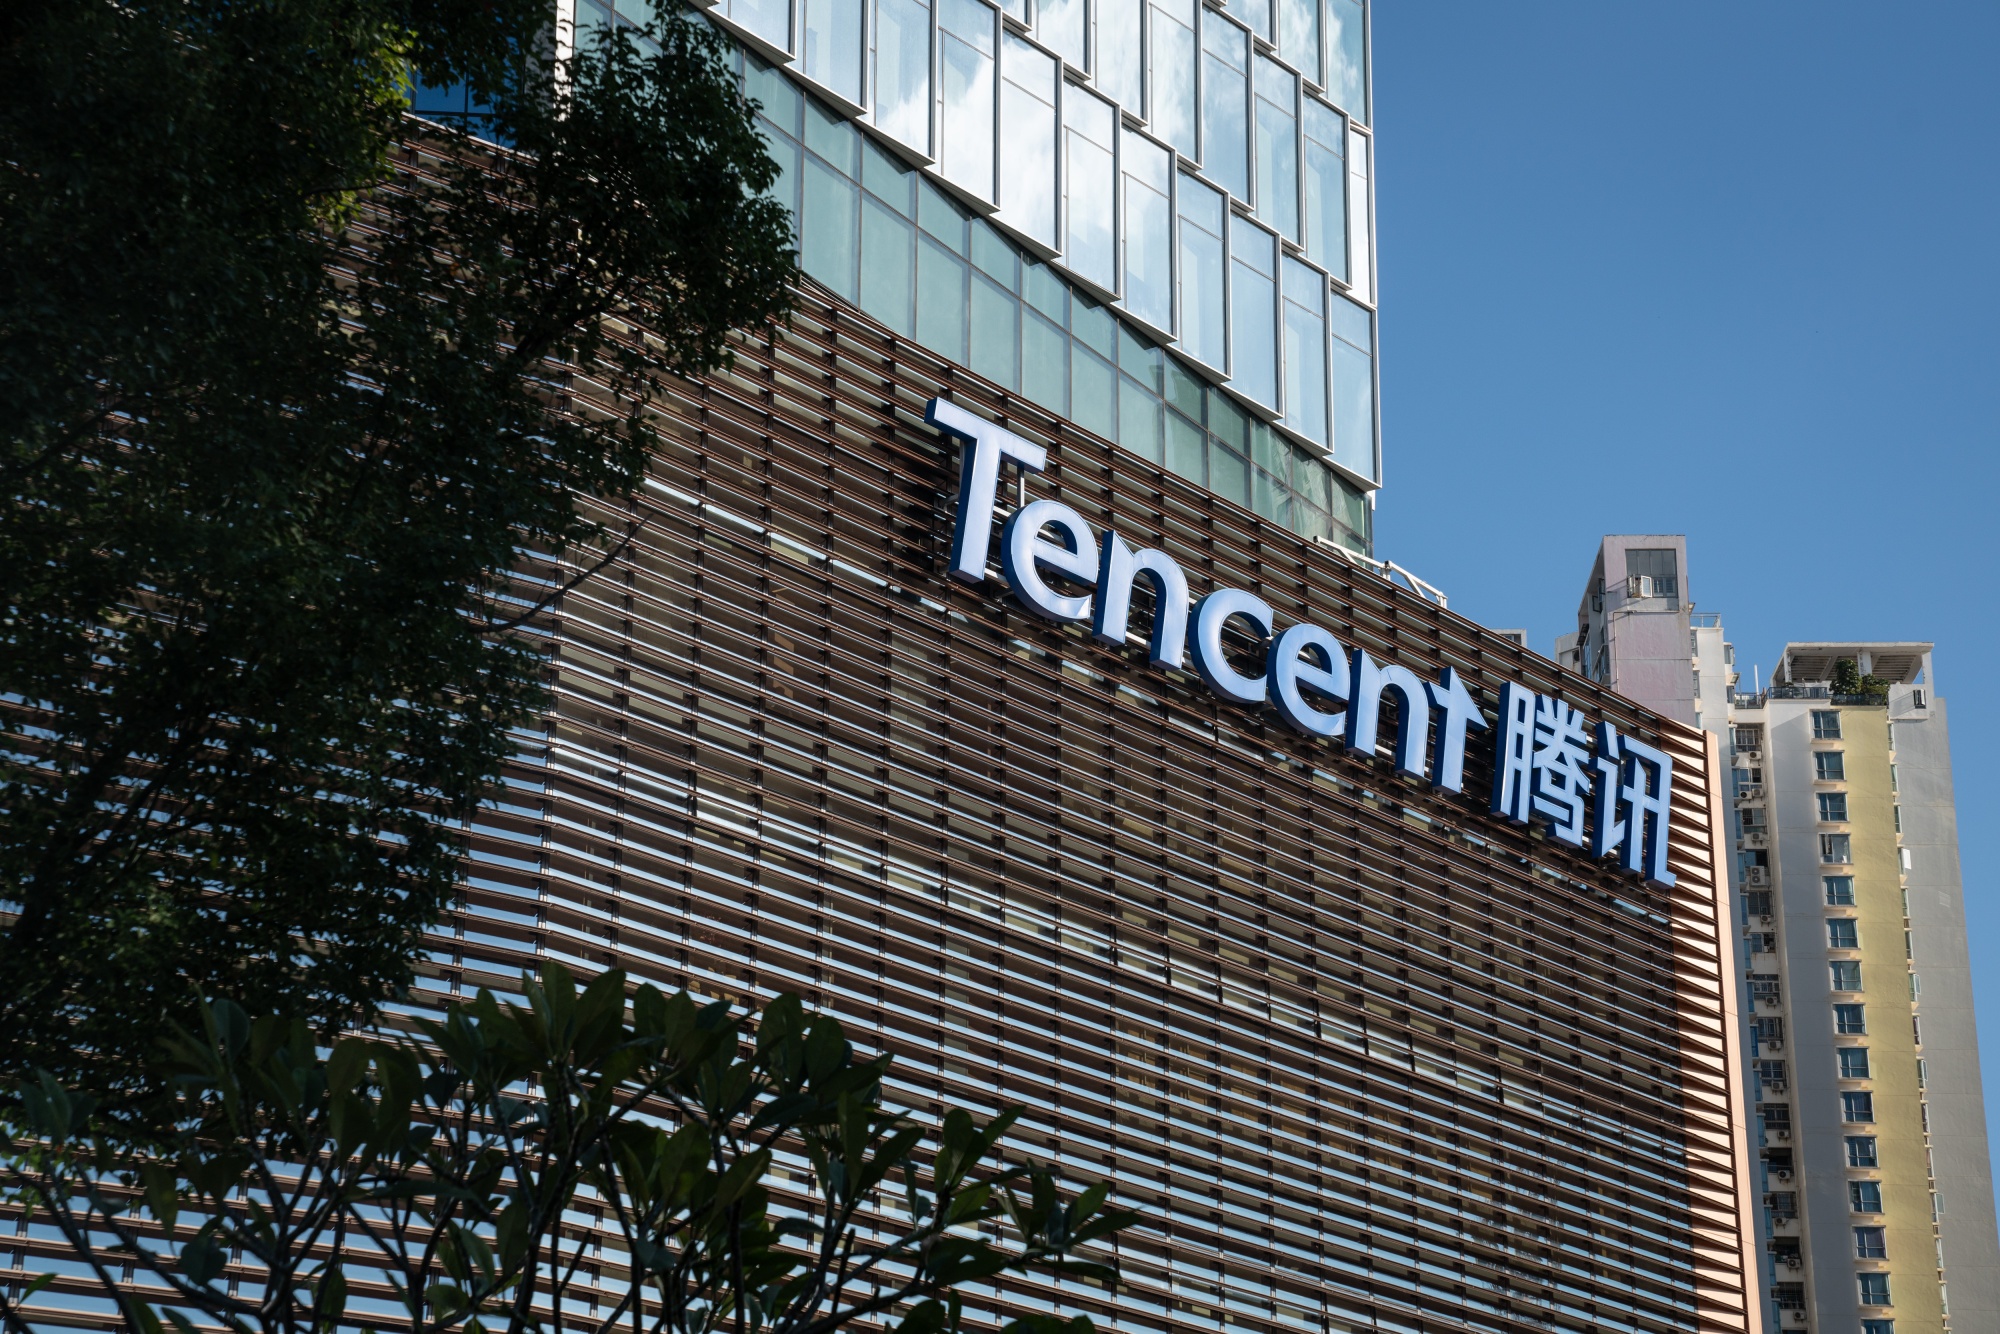 Tencent Binhai Mansion as the Chinese Tech Company Invests $150 Million in Waterdrop